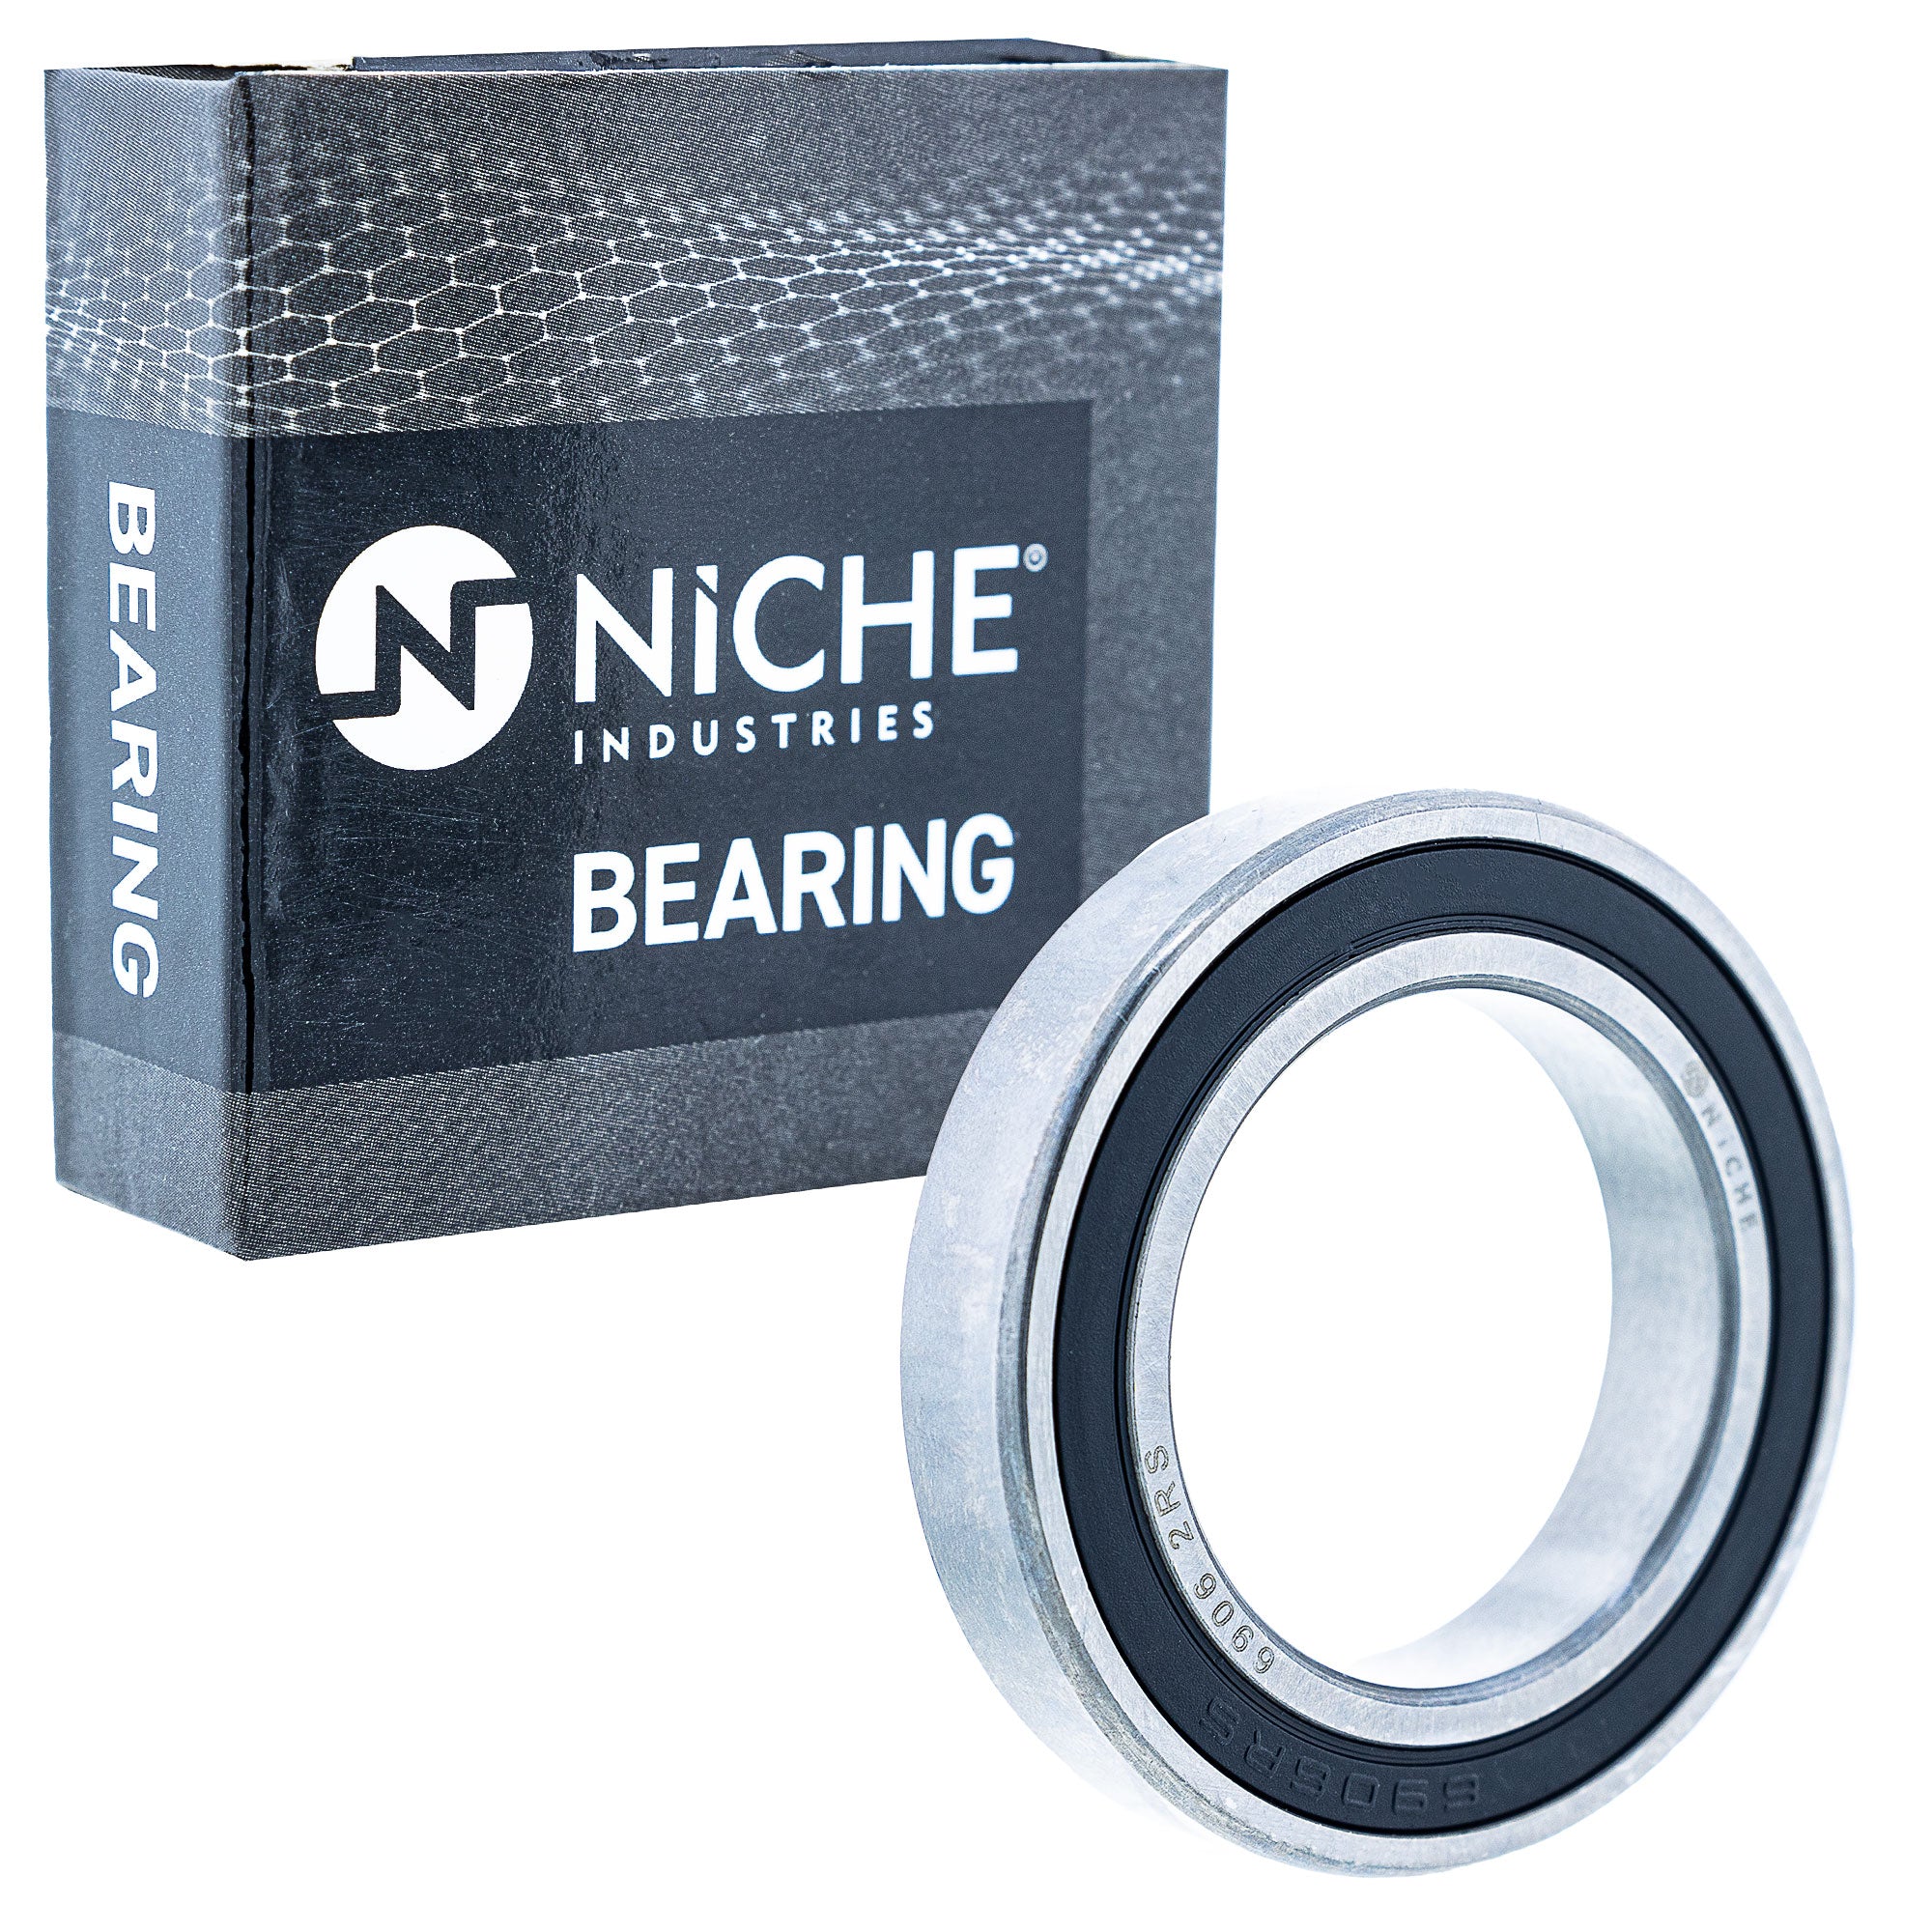 NICHE 519-CBB2250R Bearing for zOTHER